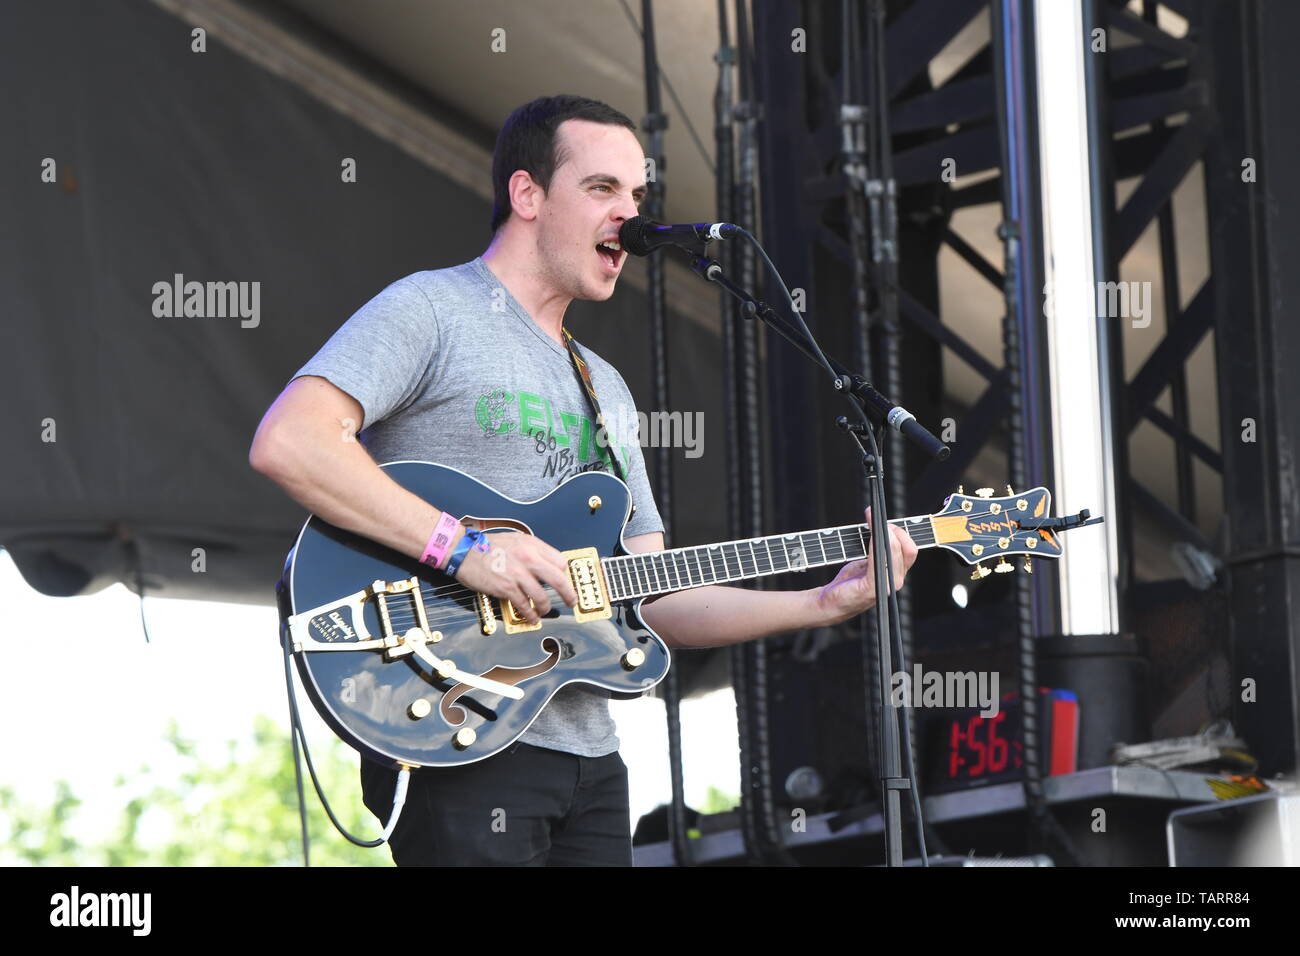 Singer, songwriter and guitarist Tom Russo is shown performing on stage during a "live" concert appearance with Rolling Blackouts Coastal Fever. Stock Photo